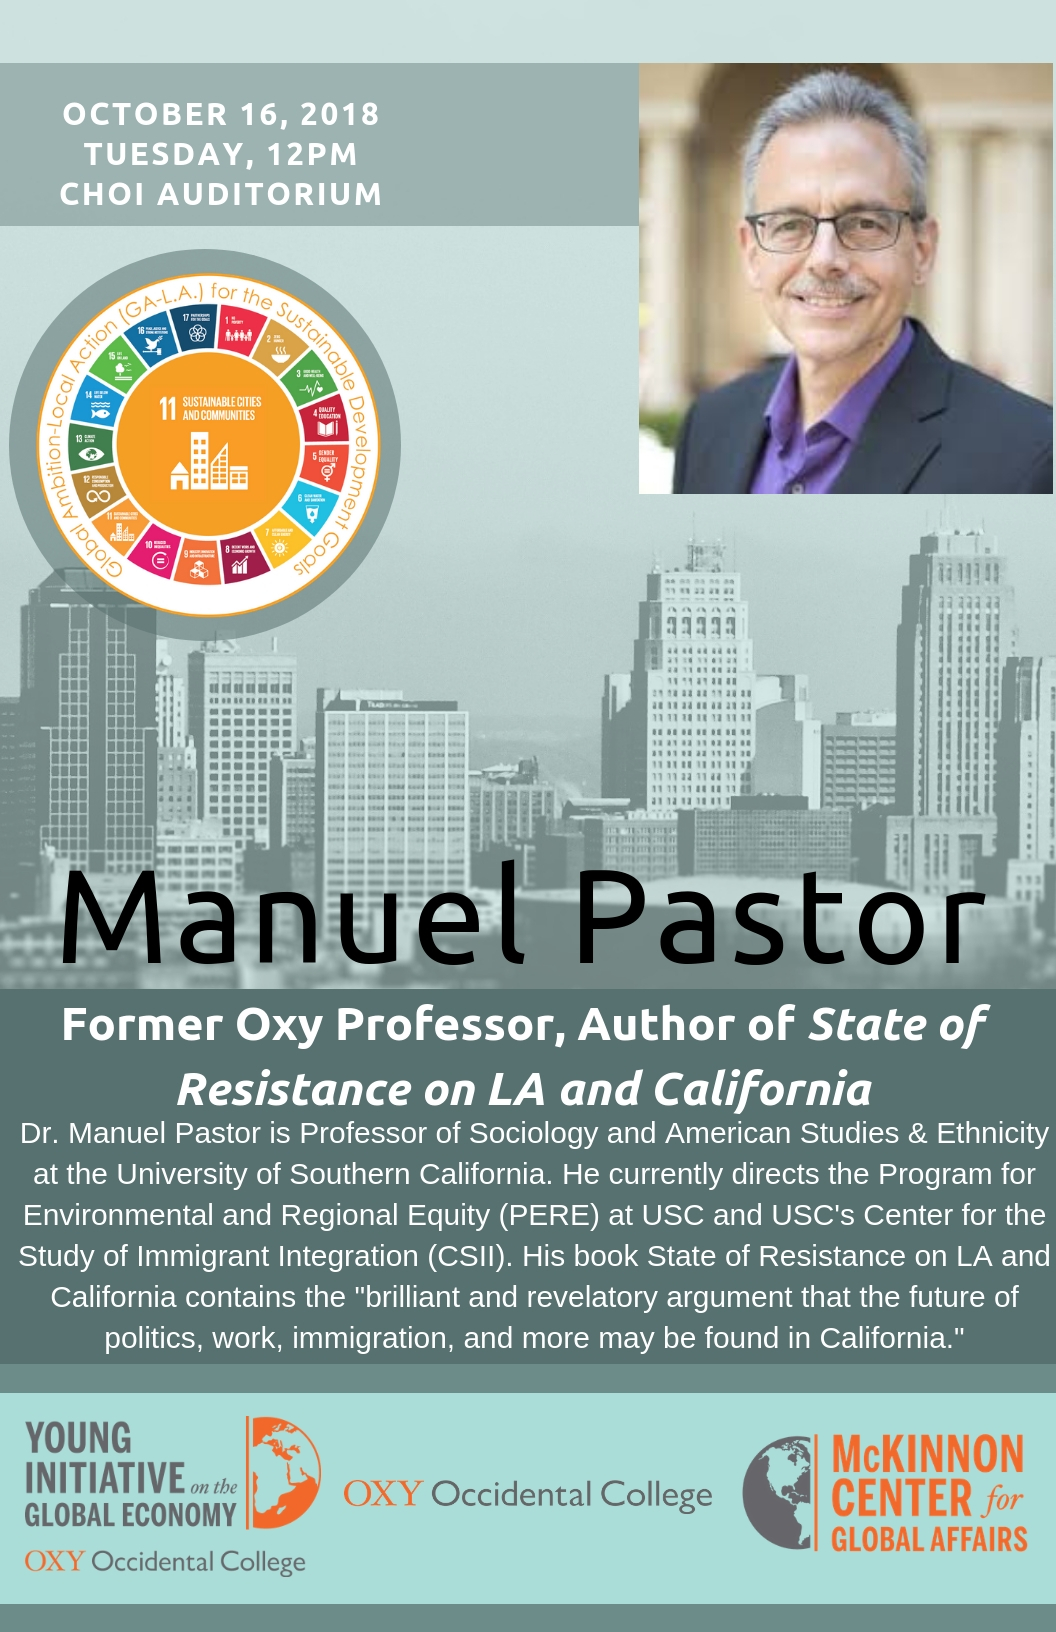 Image for UN Week 2018: Keynote on Global Cities with Manuel